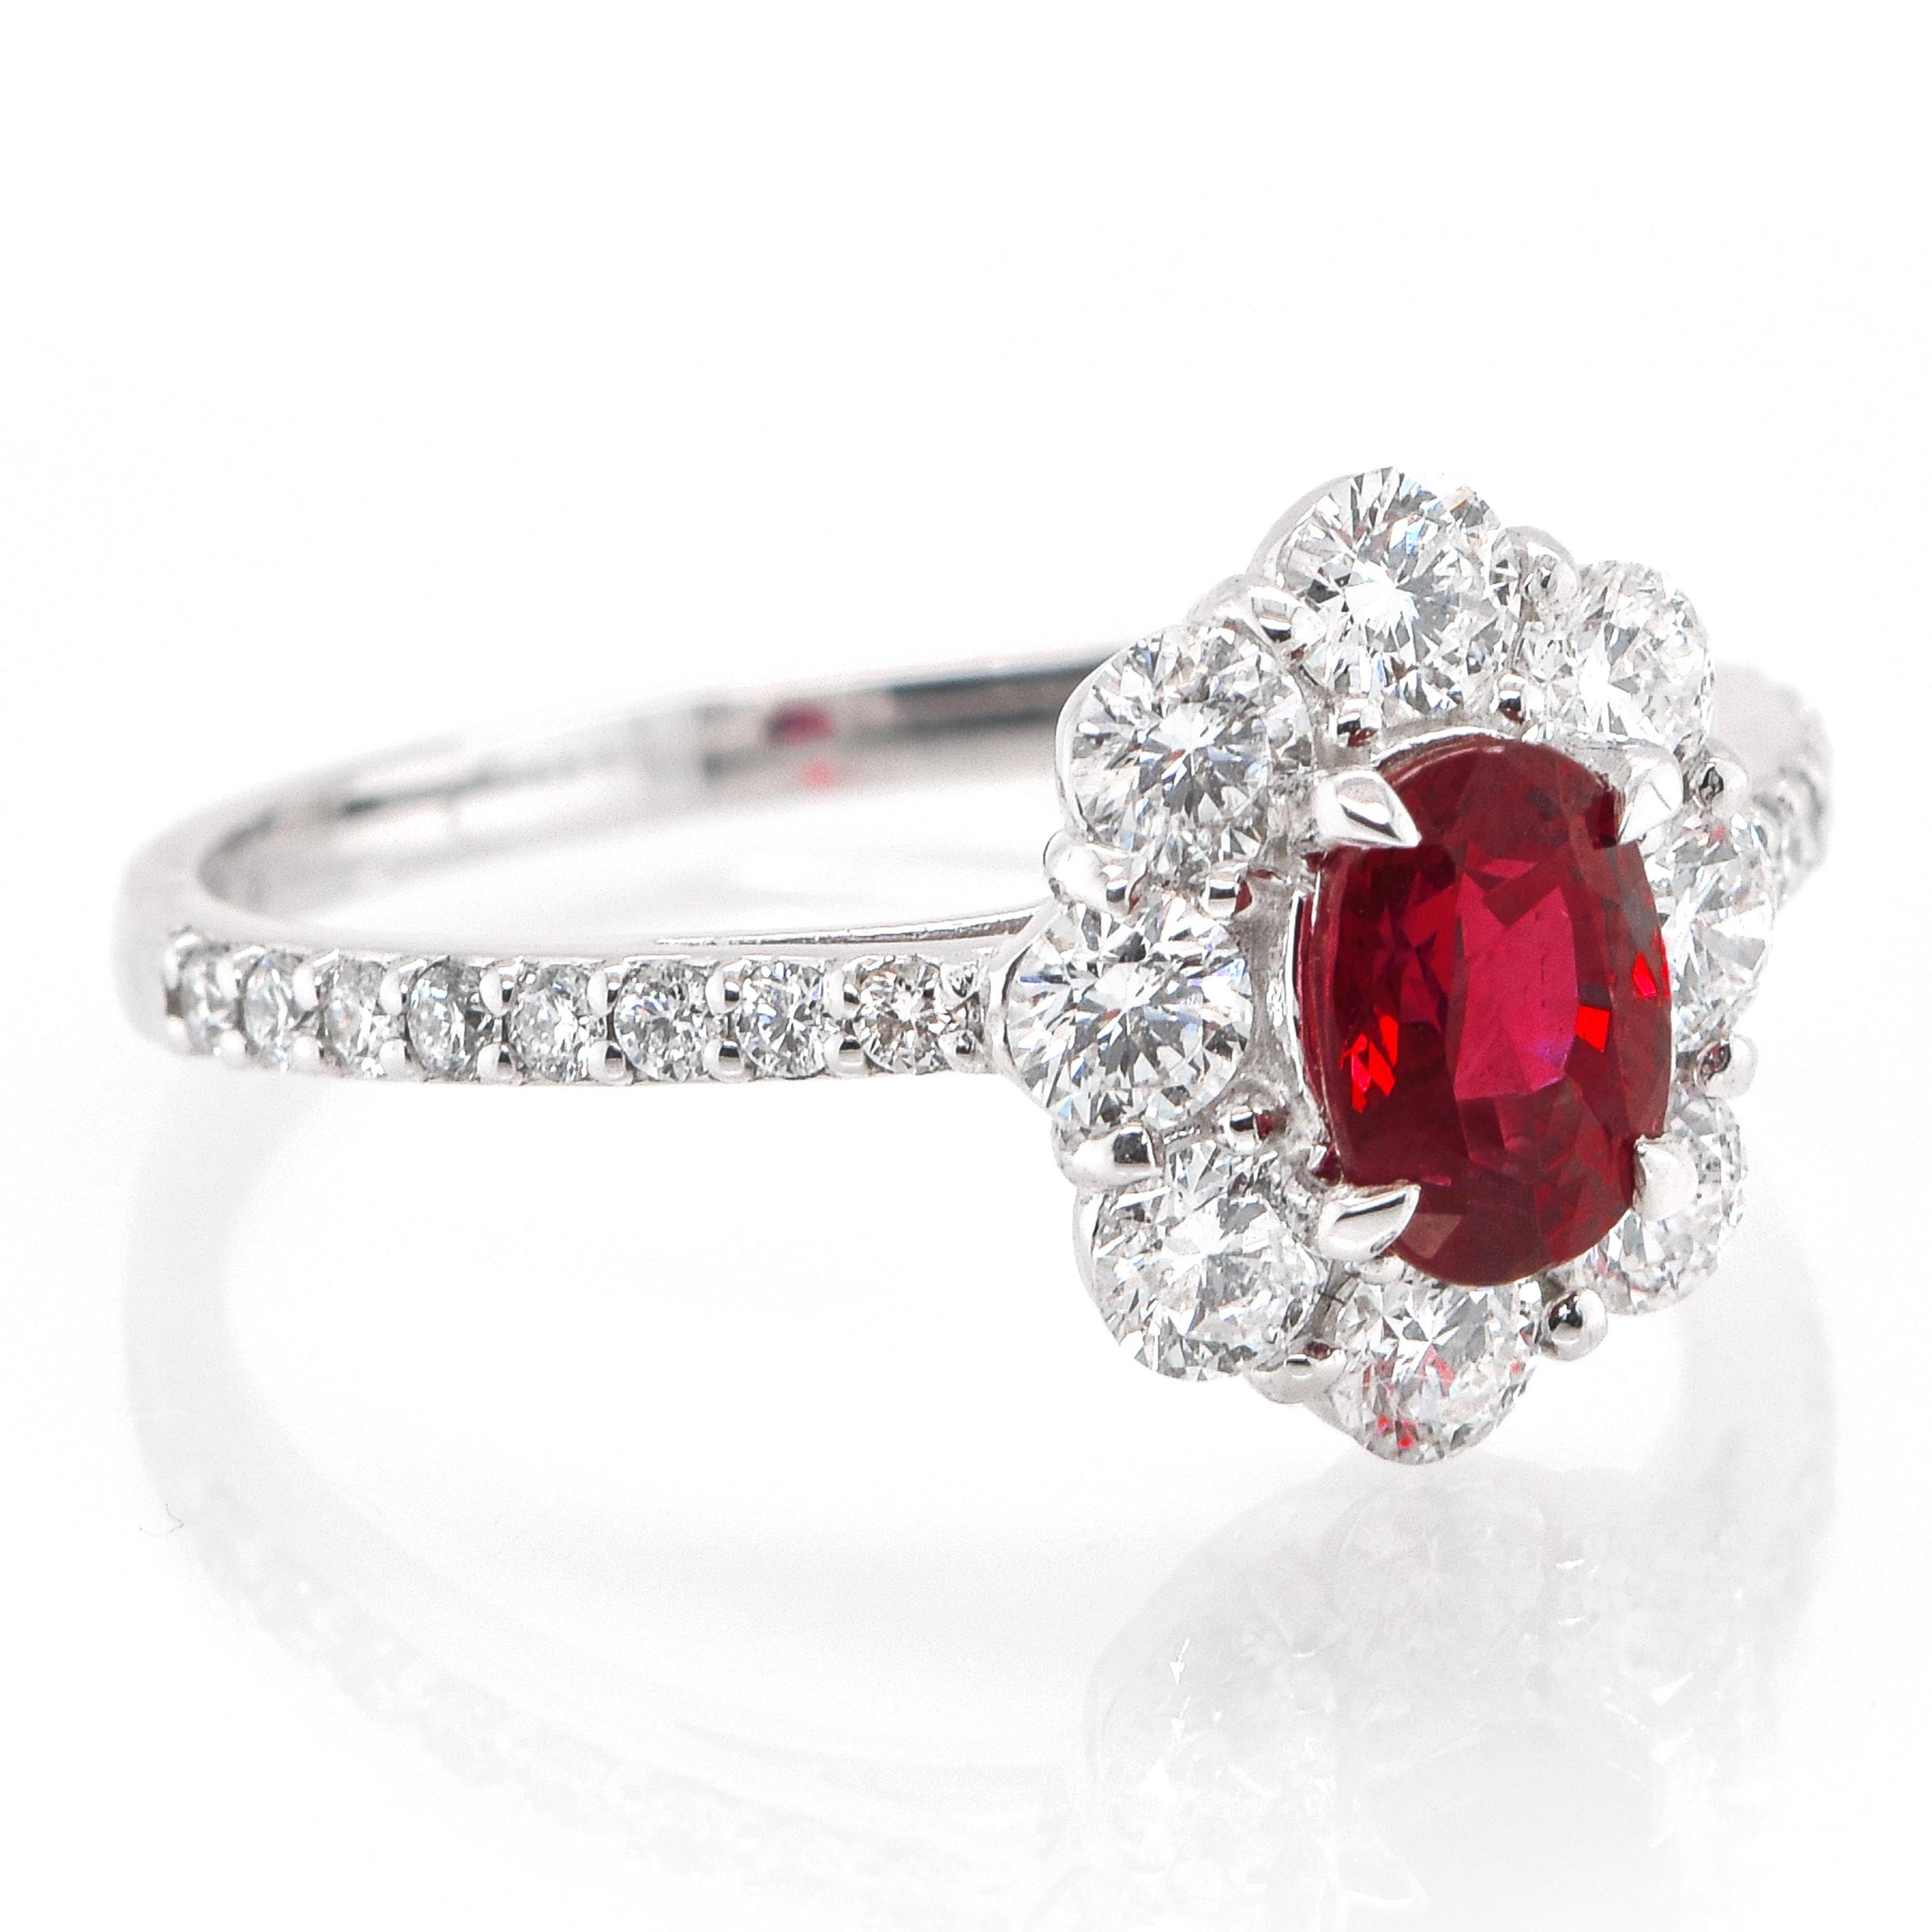 A beautiful ring set in Platinum featuring a GIA Certified 0.85 Carat Natural Thailand Ruby and 0.74 Carat Diamonds. Rubies are referred to as 